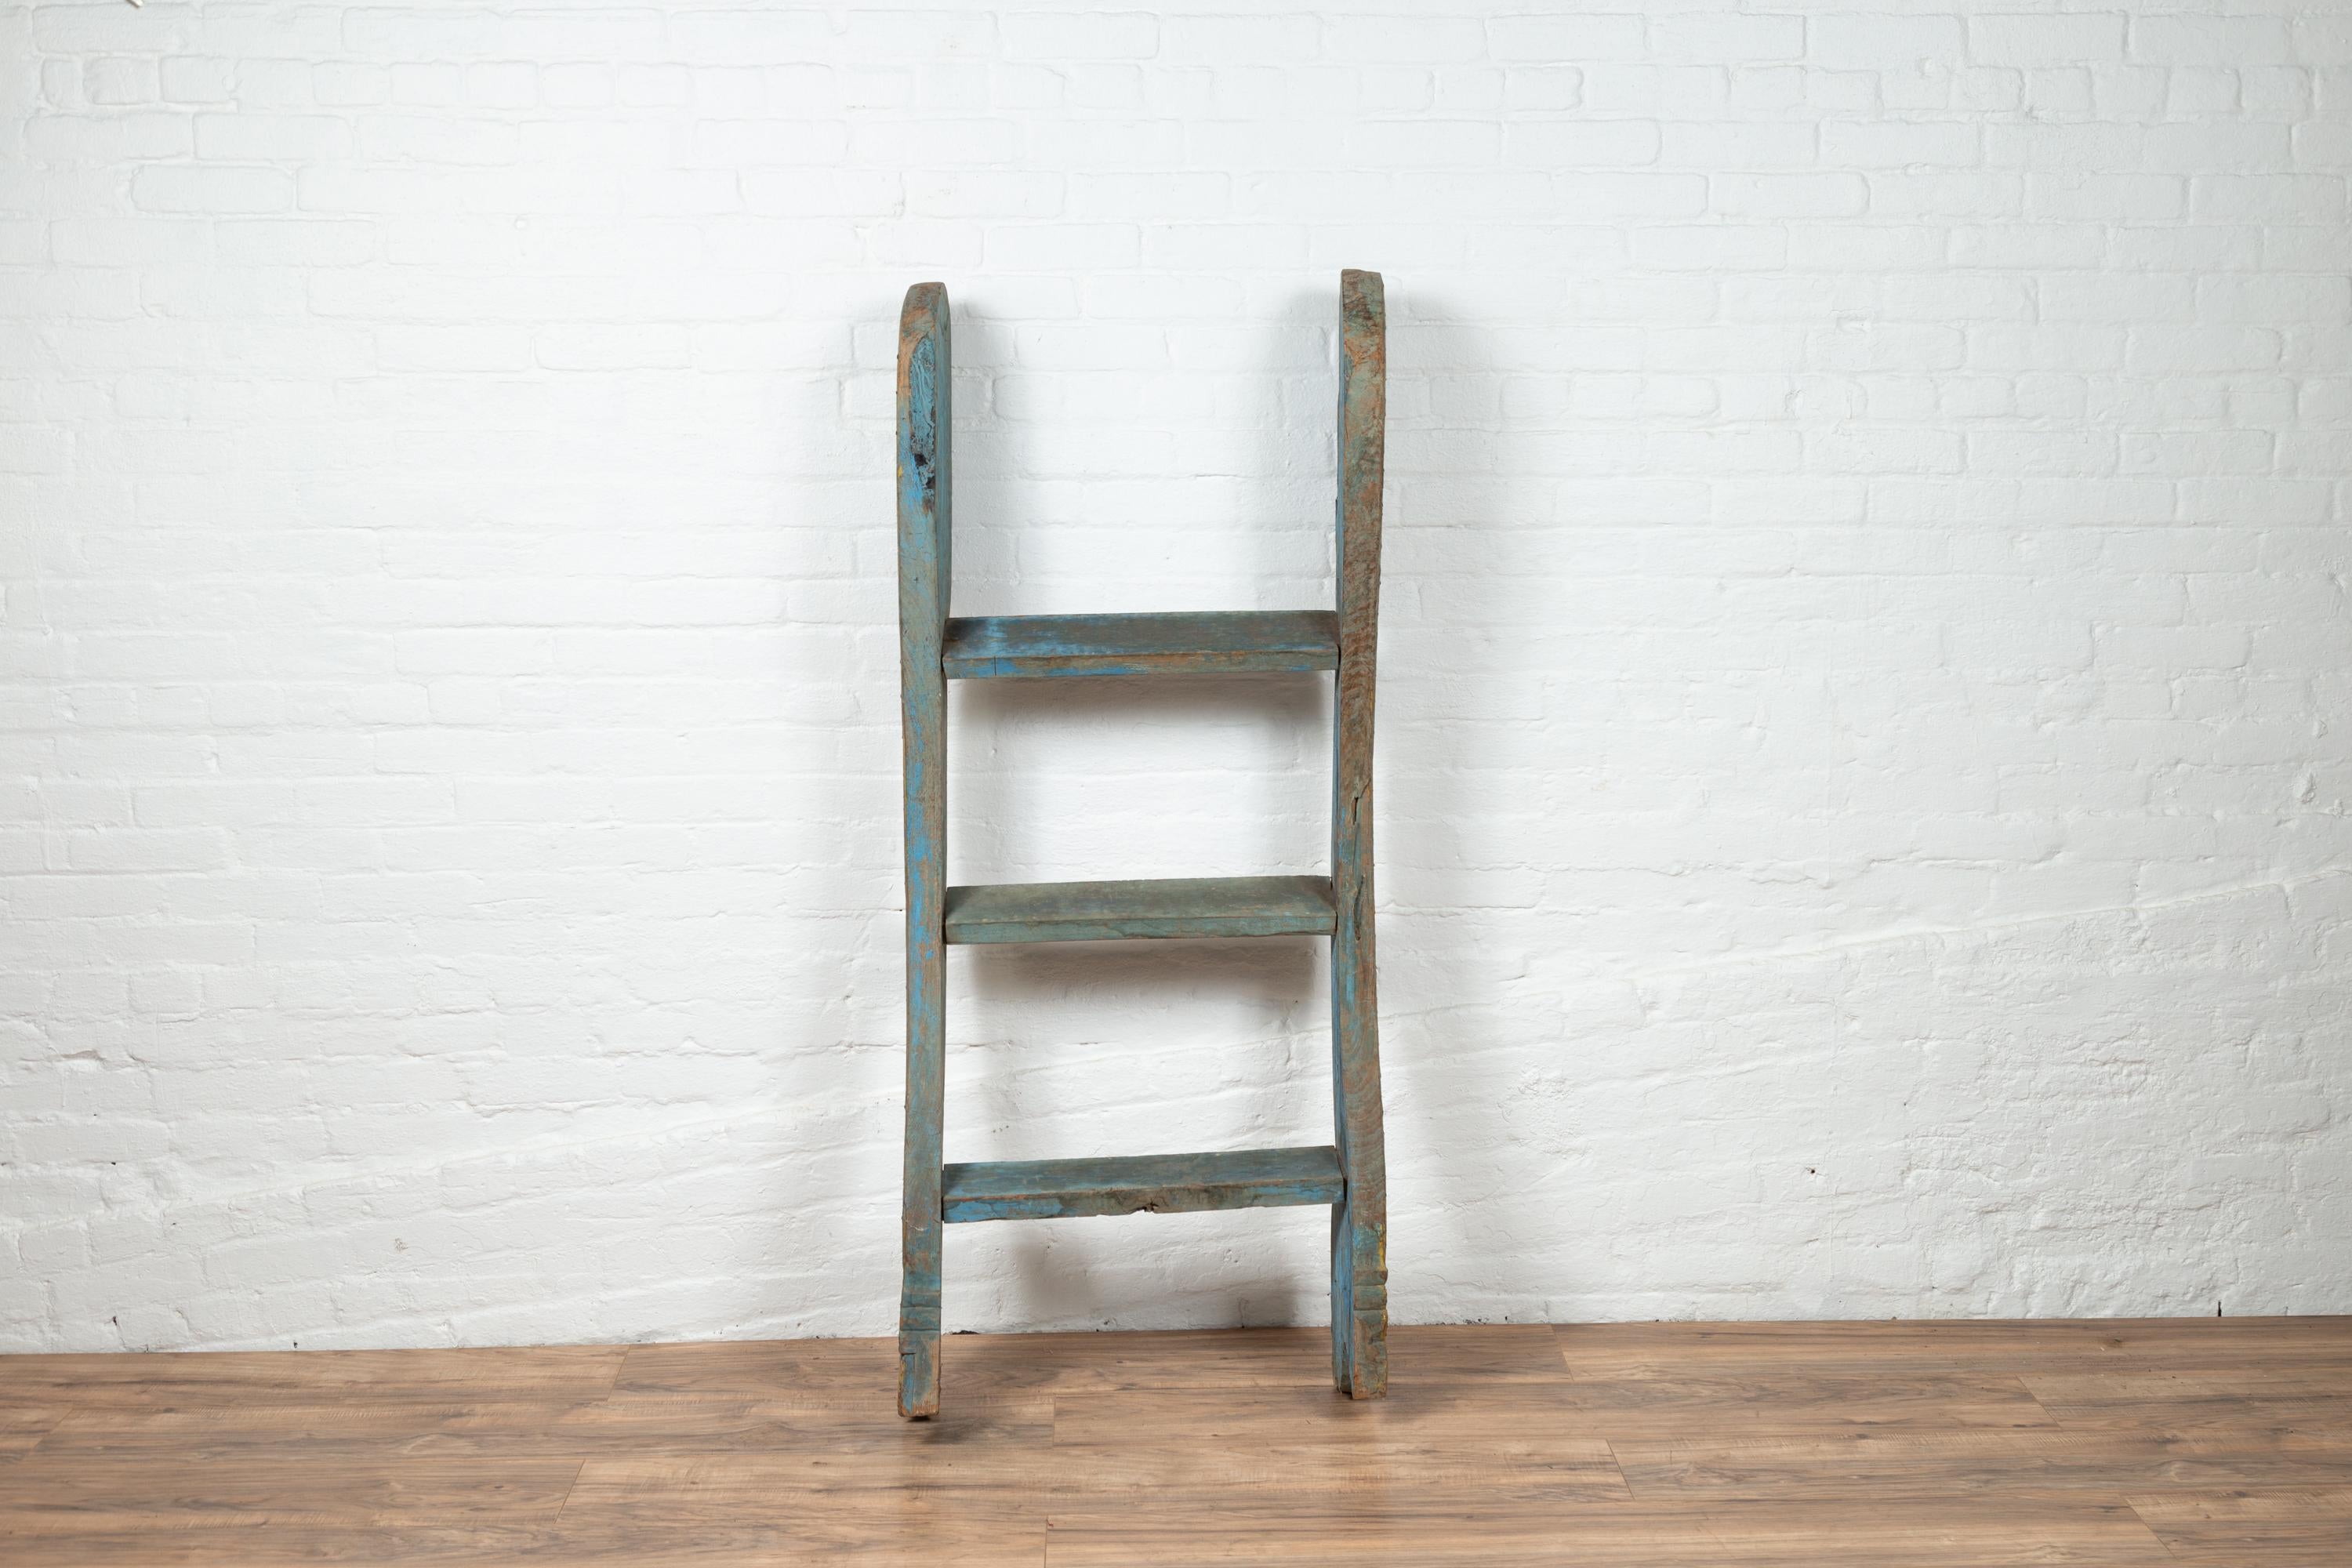 An antique Indonesian blue carved ladder from the early 20th century, with painted and gilt accents. Born in Indonesia during the early years of the 20th century, this charming painted ladder will be a wonderful decorative accent in any room.